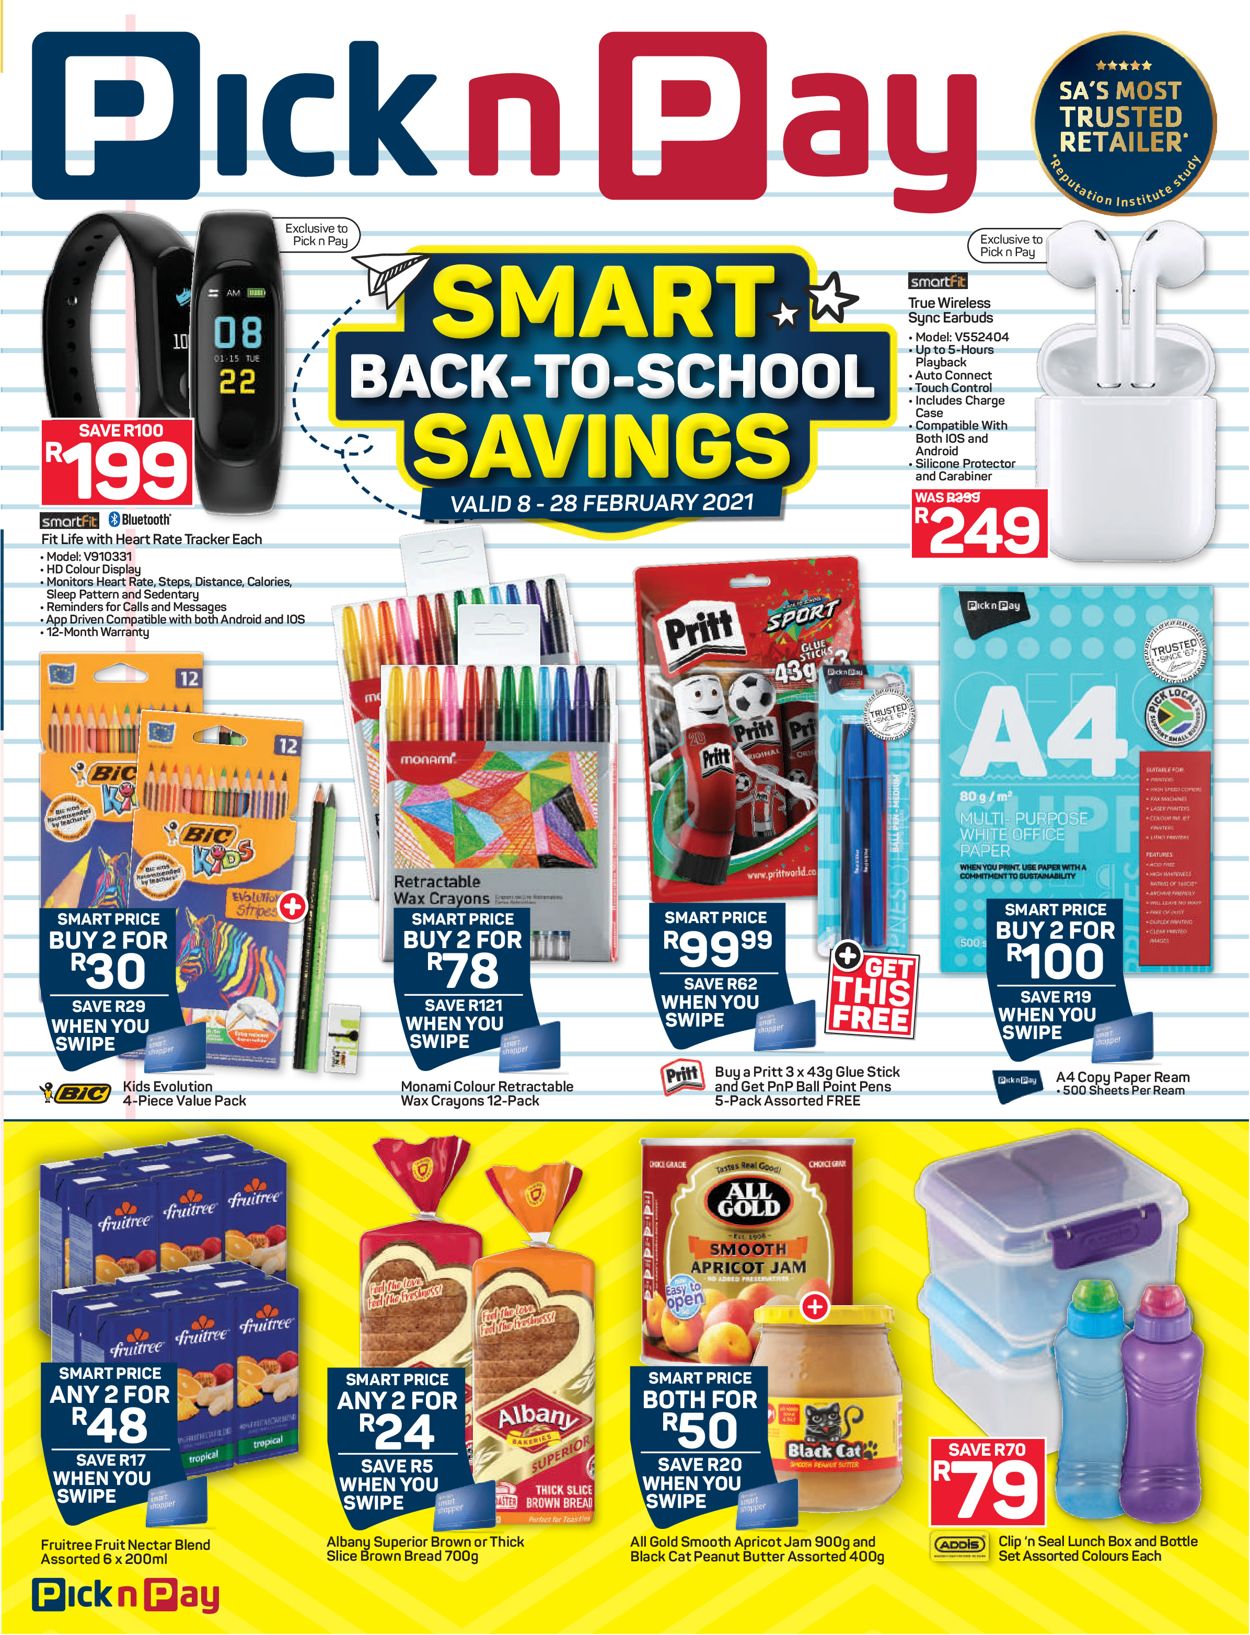 Pick n Pay Back to School 2021 Catalogue - 2021/02/08-2021/02/28